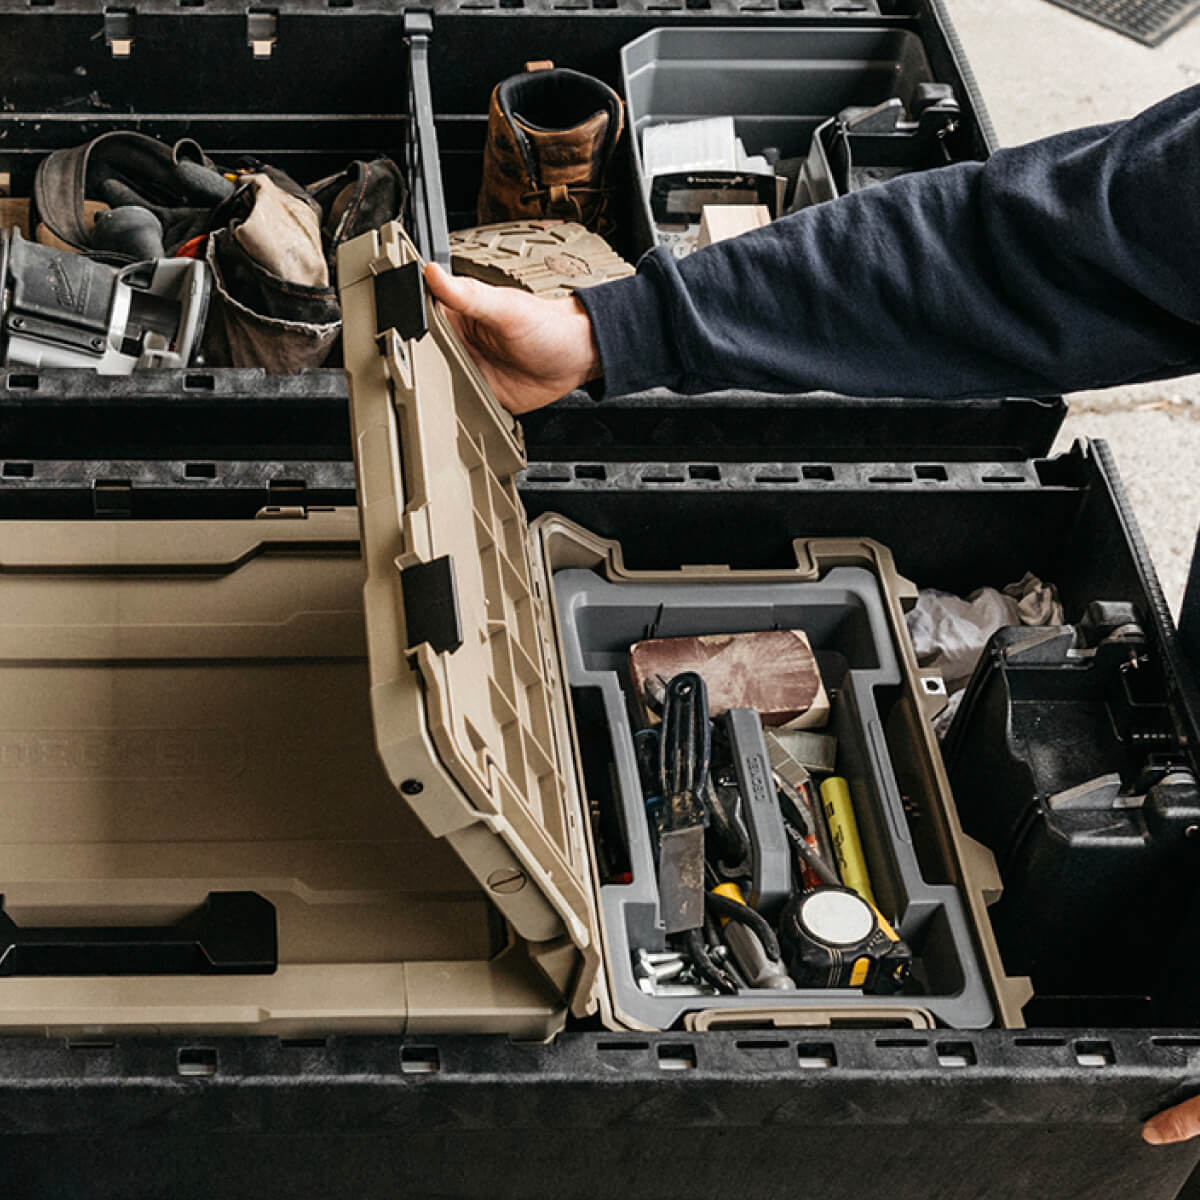 The Famous Toyo Tool Box – Changing What “Made In Japan” Means to Amer